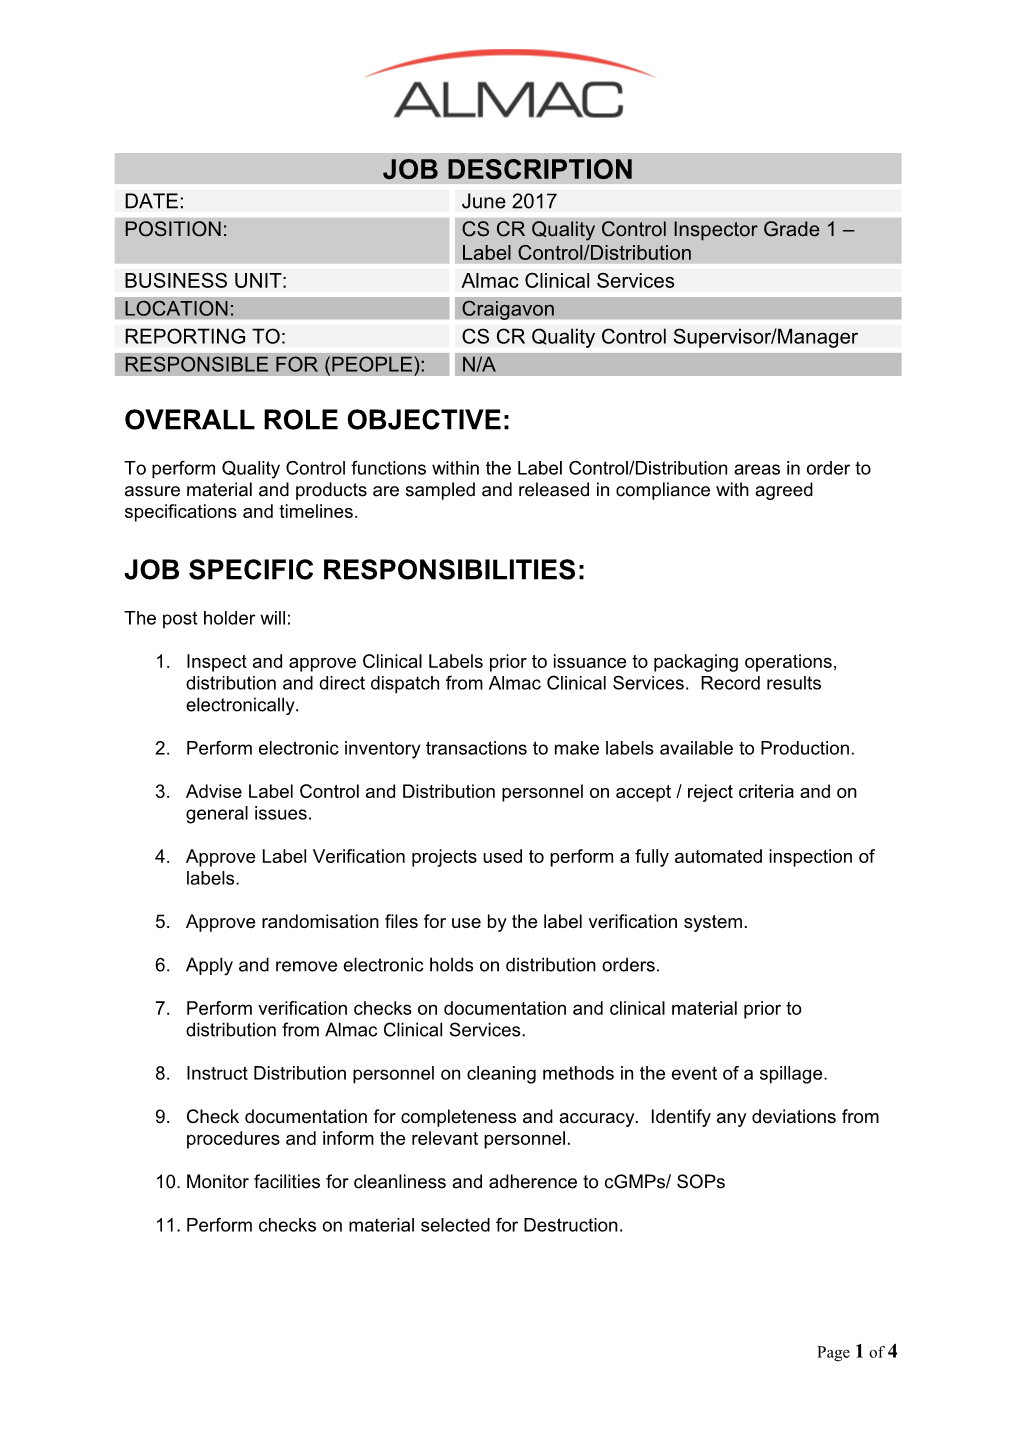 Overall Role Objective s1